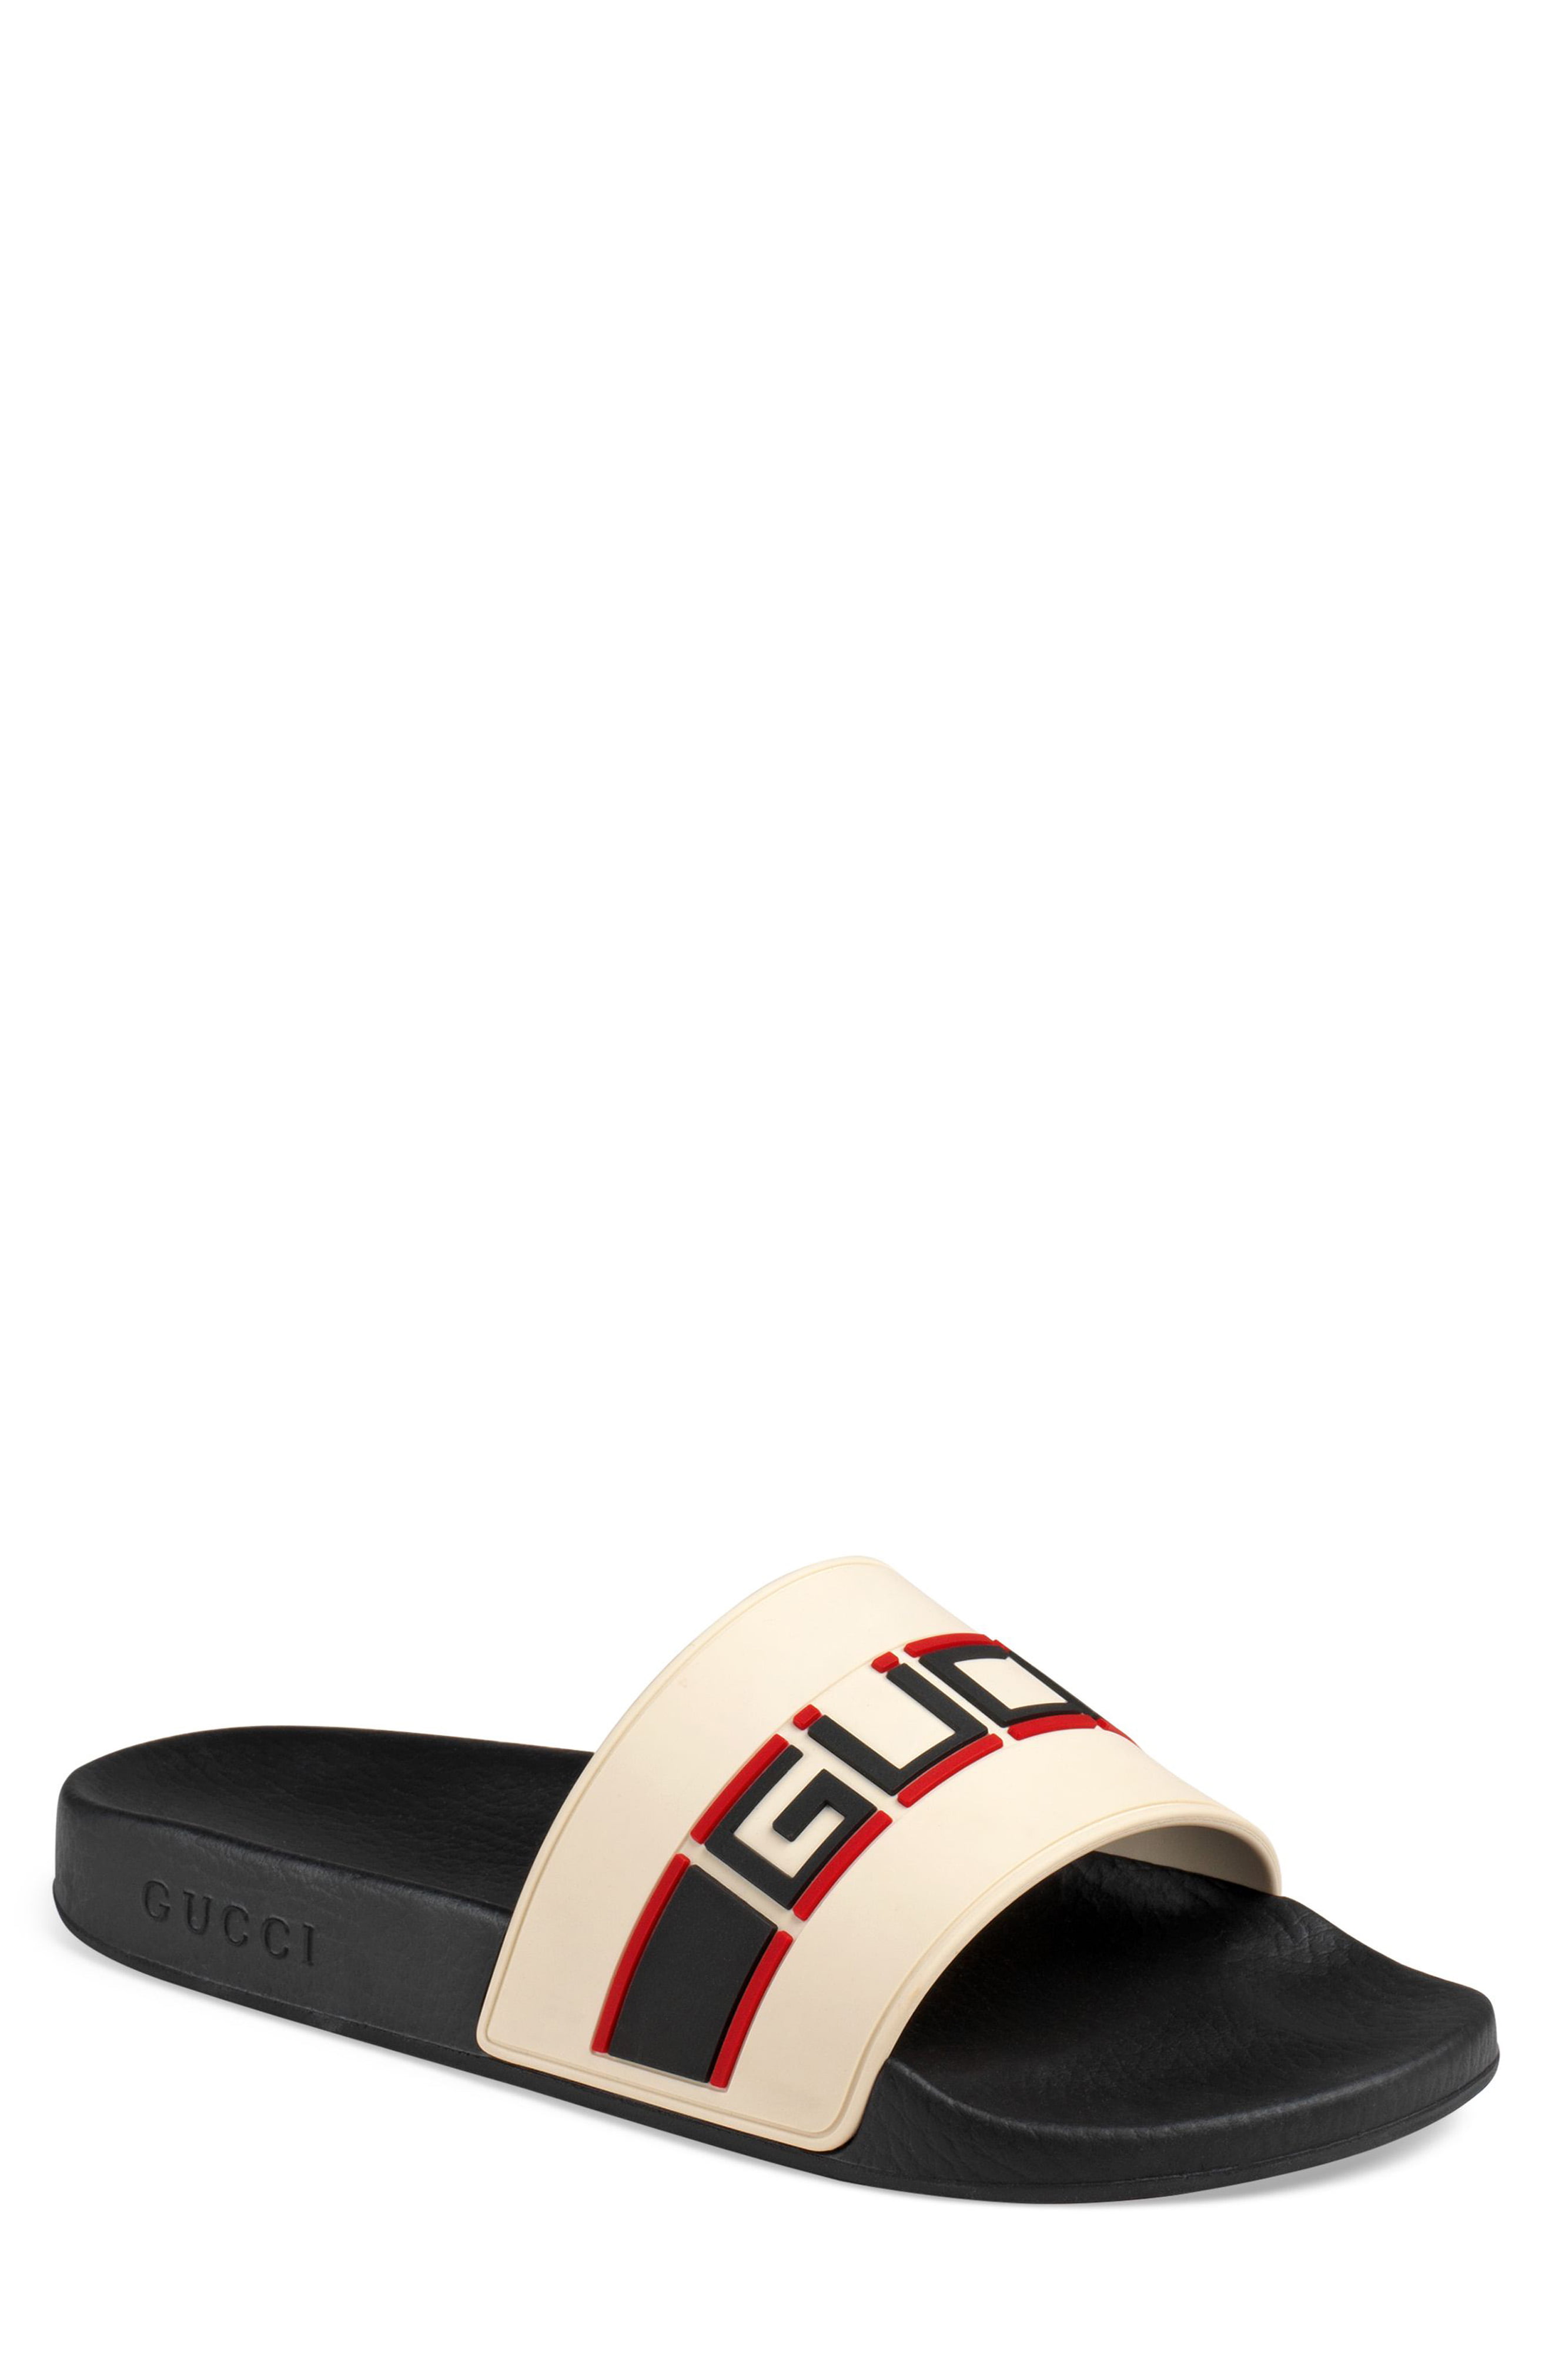 white and red gucci slides